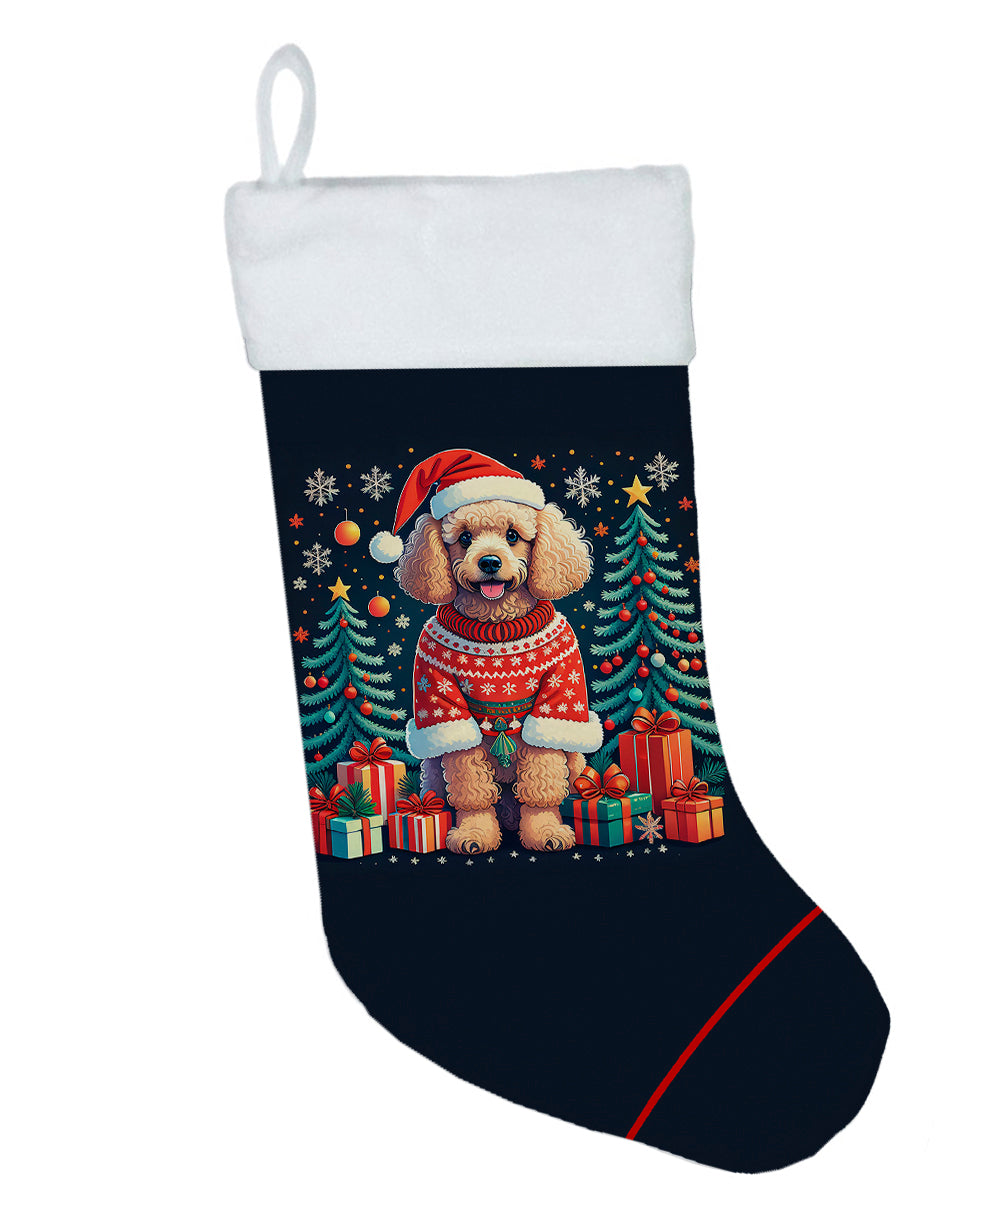 Buy this Apricot Toy Poodle Christmas Christmas Stocking